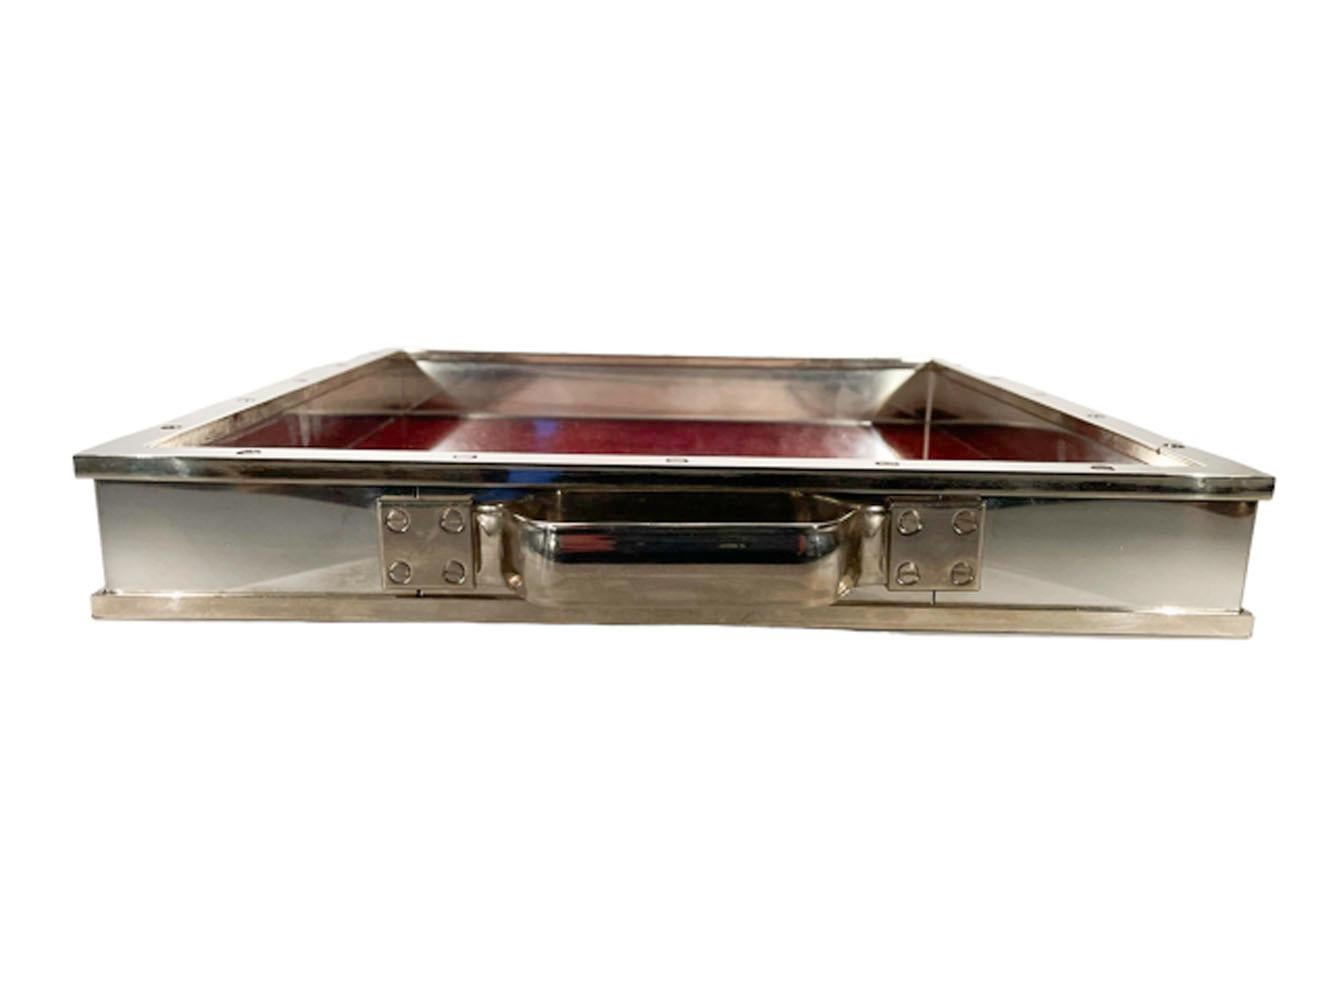 American Vintage Chrome and Lacquered Wood Serving Tray with Countersunk Screwhead Detail